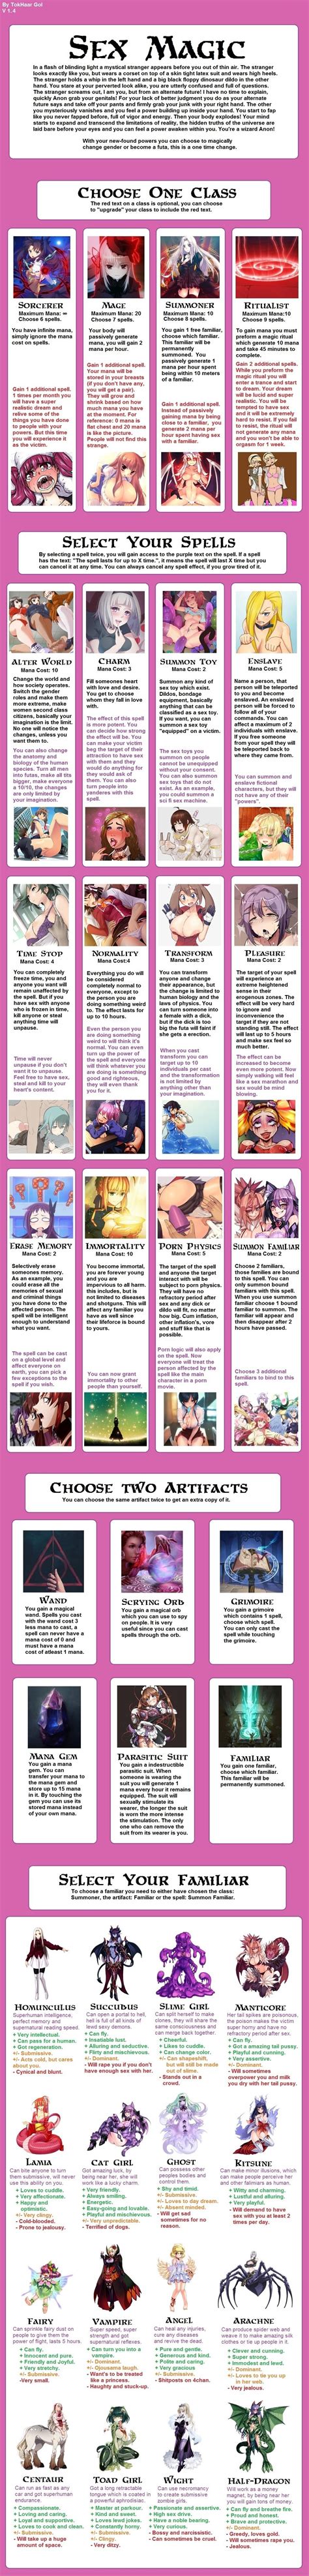 PornGames.games has 38 hentai cyoa video game games. All of our sex games are free to play, always. Enjoy our collection of free porn games and free adult games. pc download. Lovely Academy. pc download. Life is Hard - New Version 0.3.6.2. html. Christie's Room: The Flight. html. Hot Dating. html. Finger Ball.